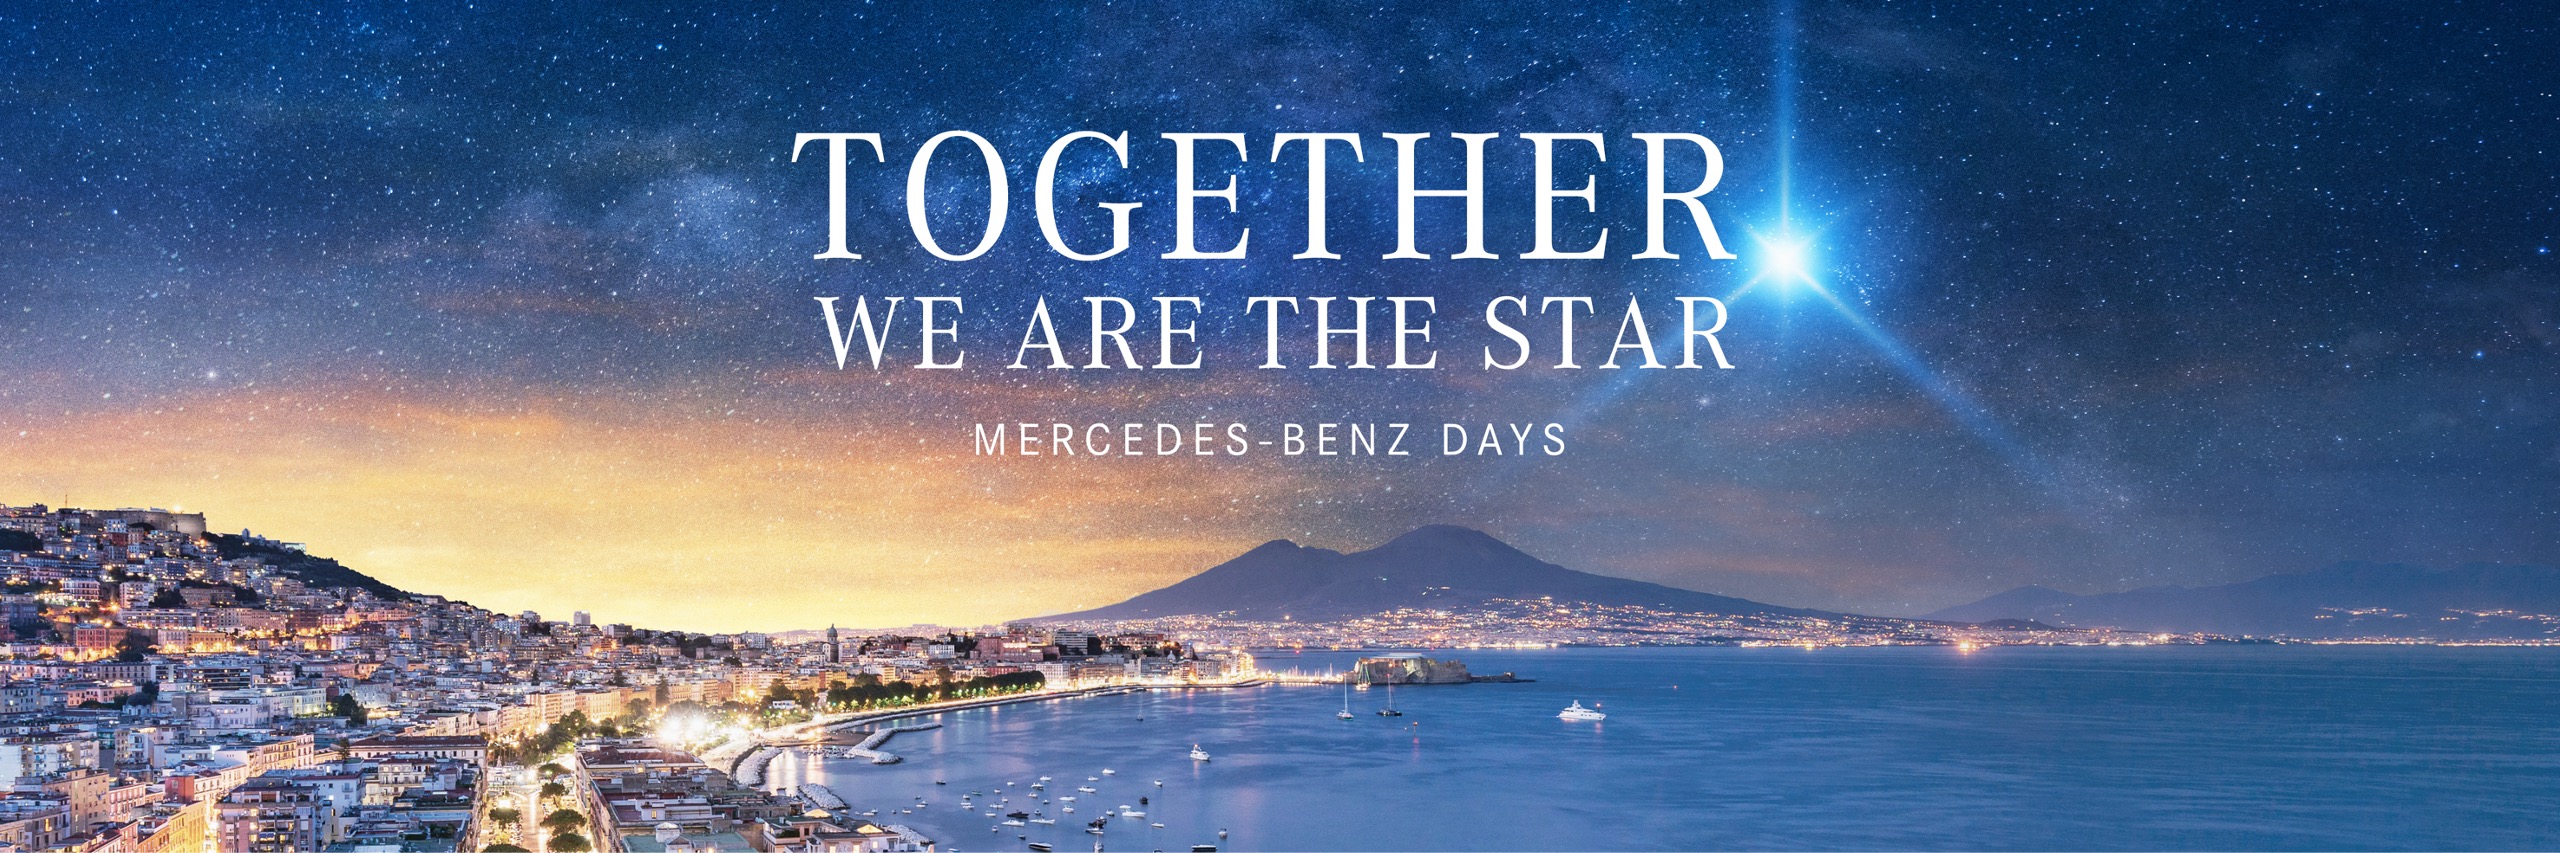 Convention We are the stars Mercedes-Benz